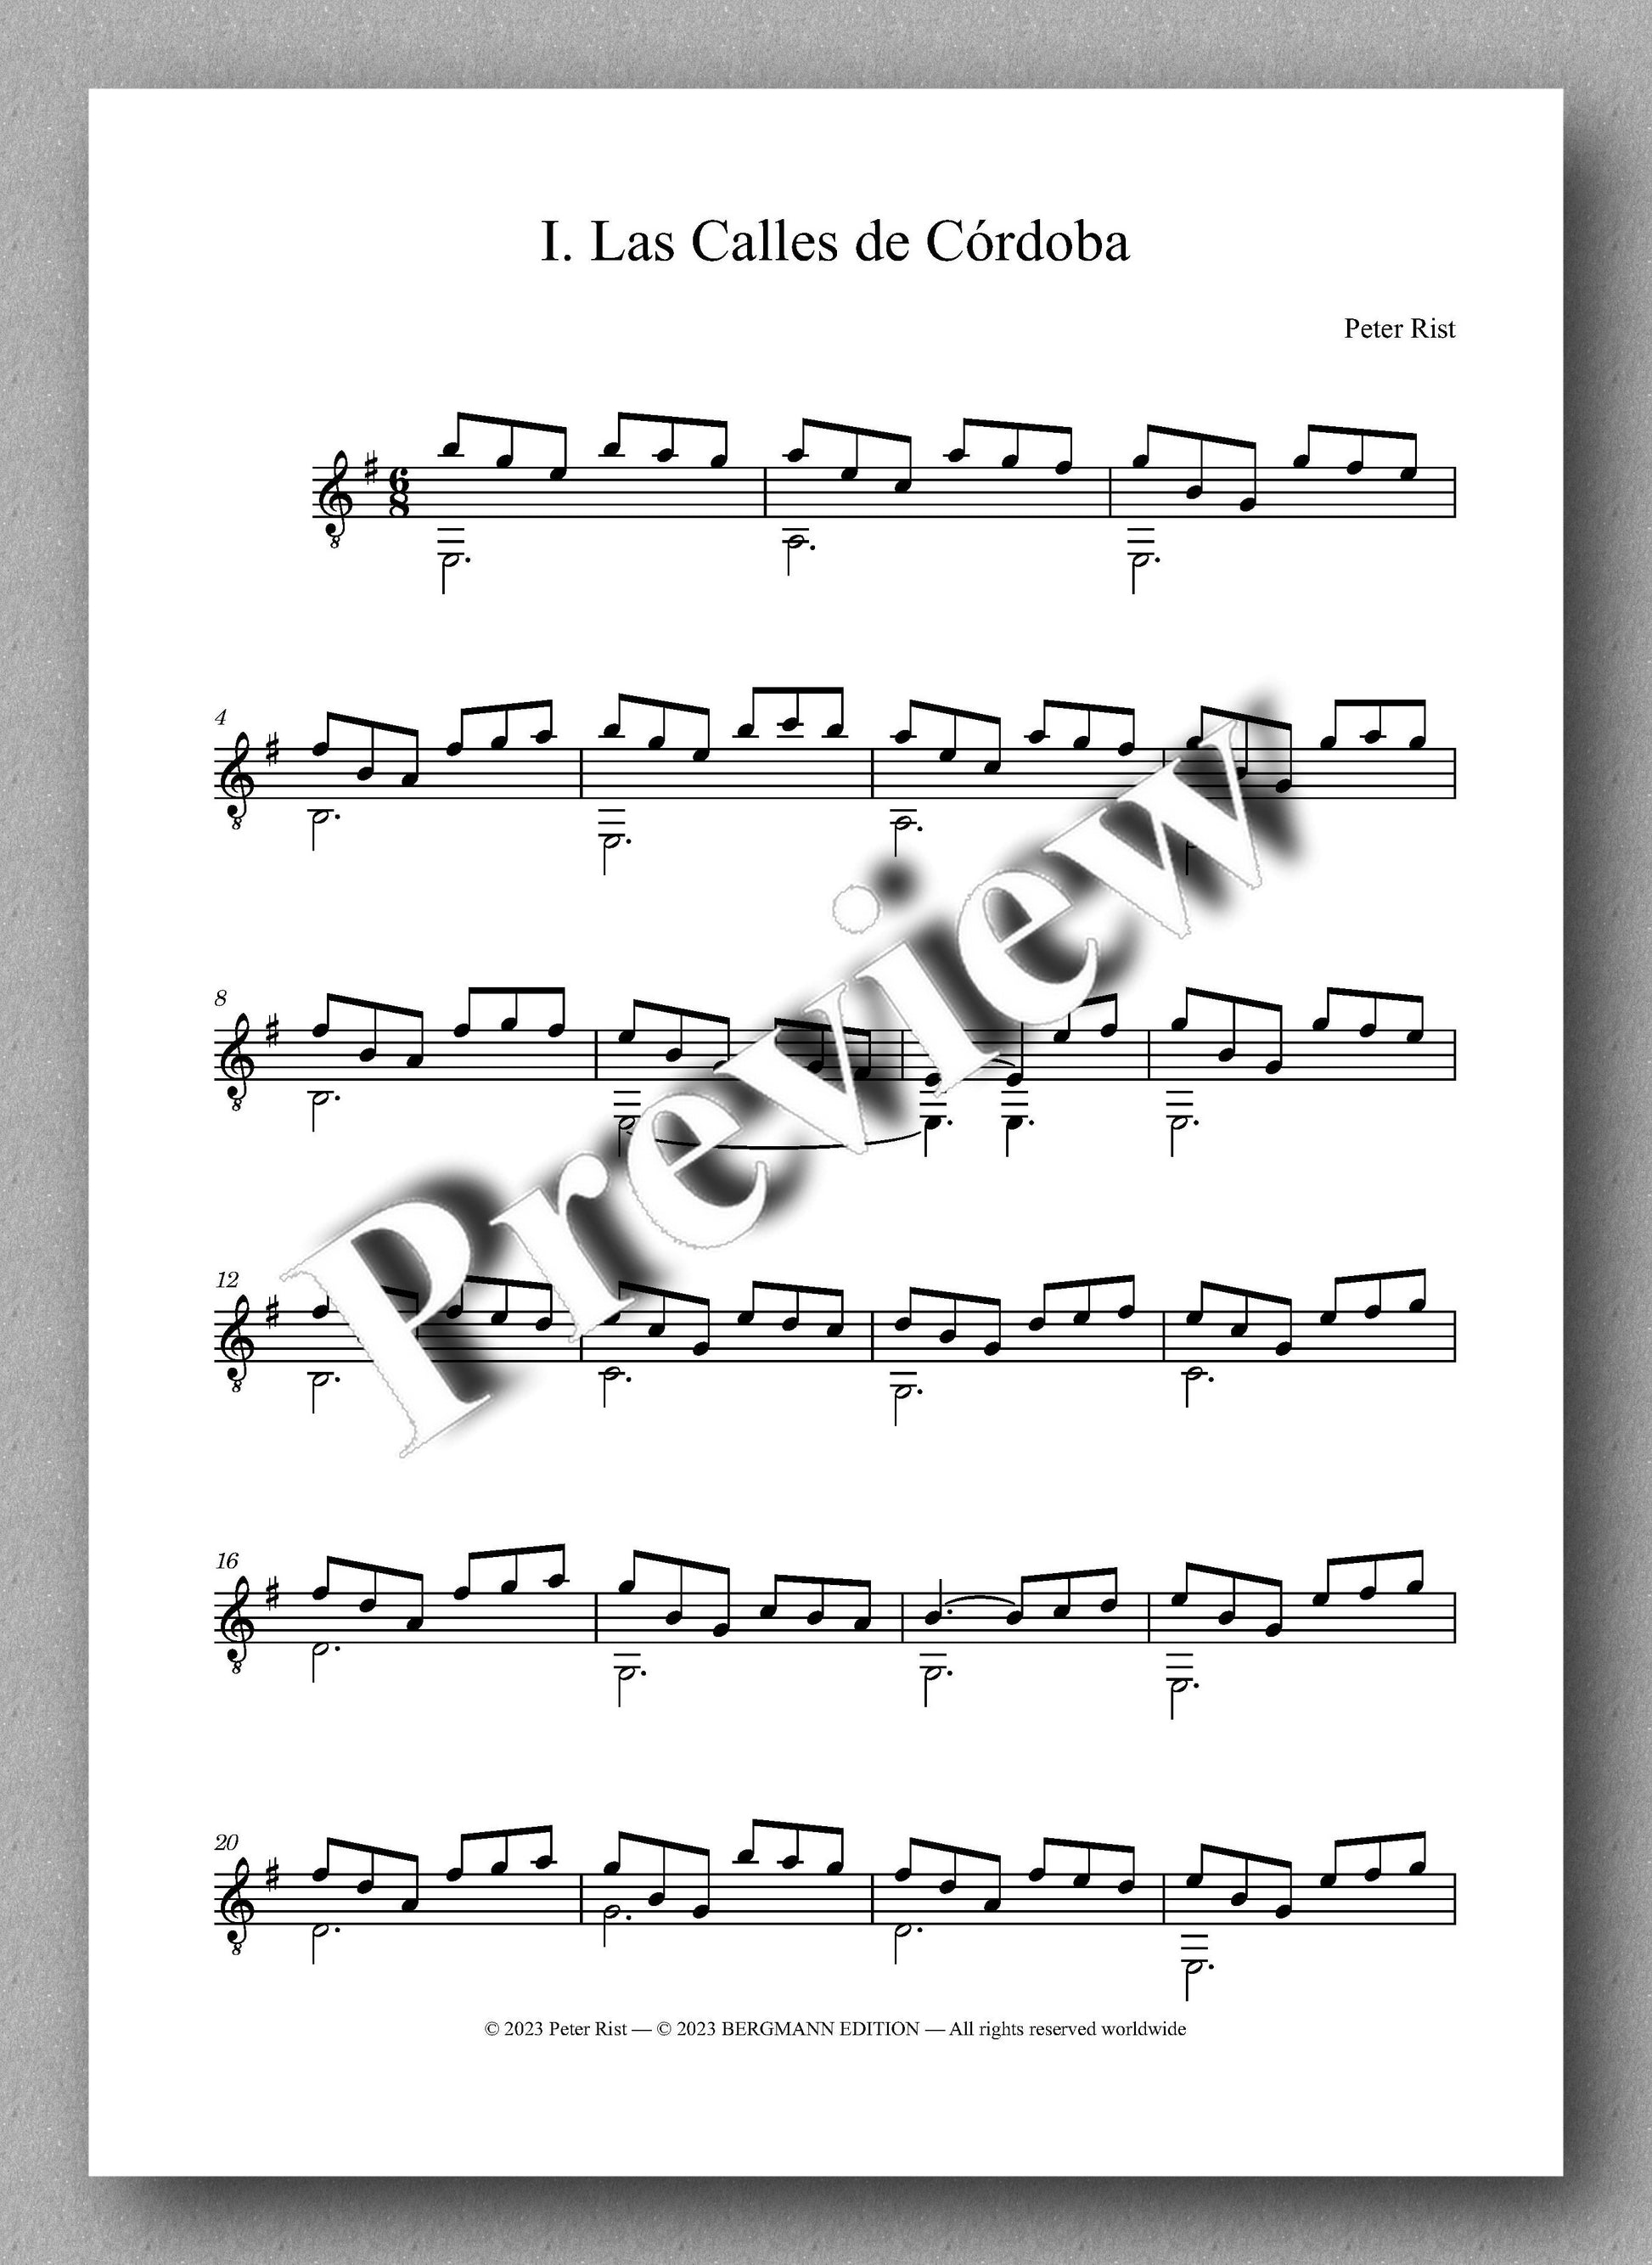 Córdoba by Peter Rist - preview of the music score 1